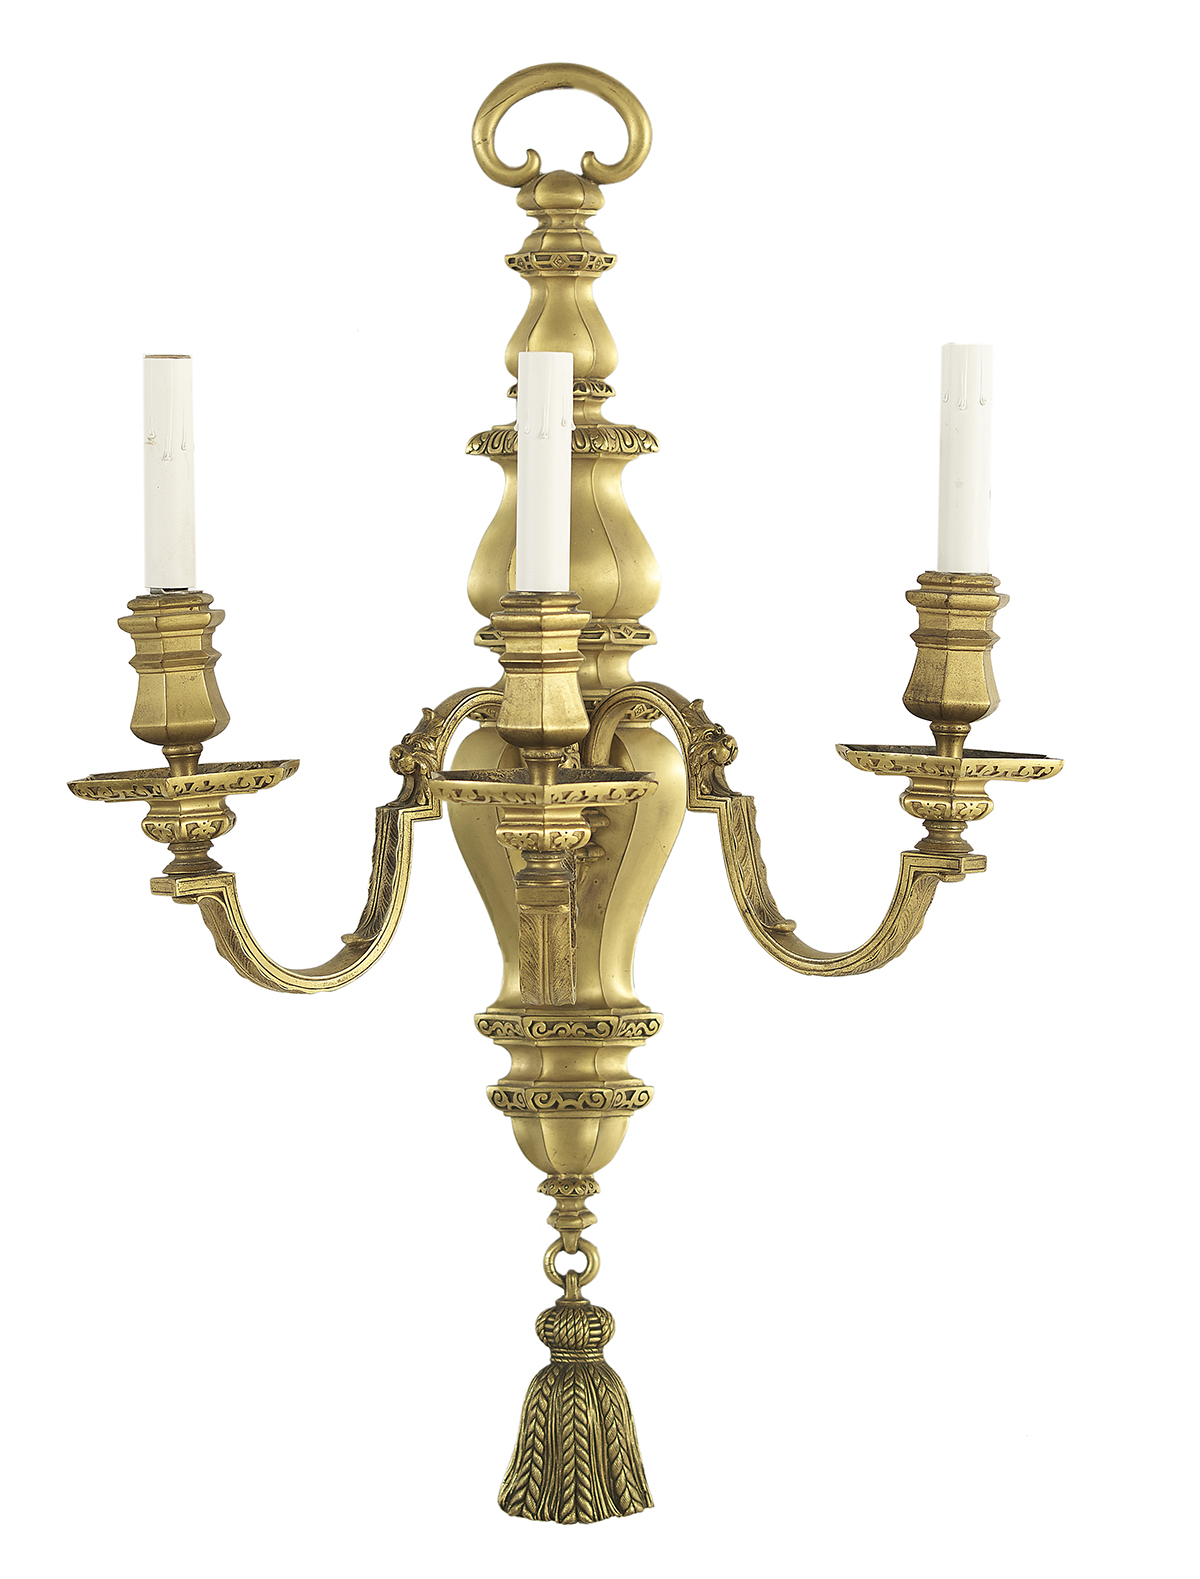 Pair of French Bronze Sconces - Image 3 of 3